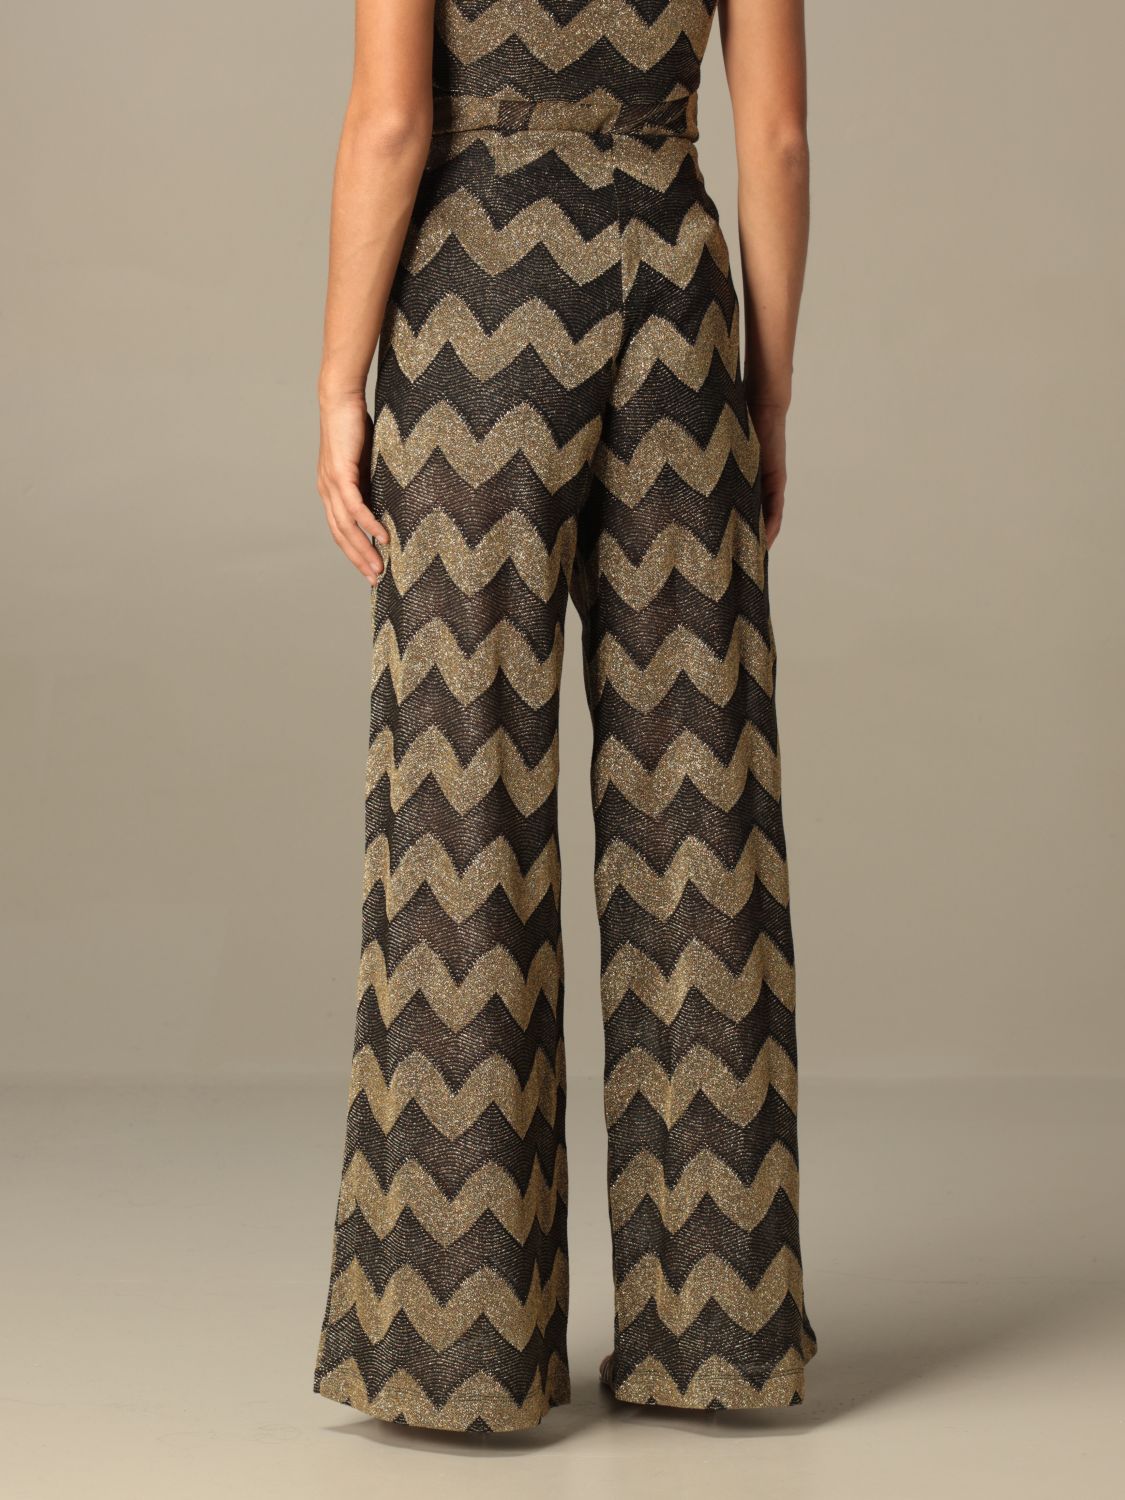 M MISSONI: pants for woman - Black | M pants 2DI00197 online on GIGLIO.COM